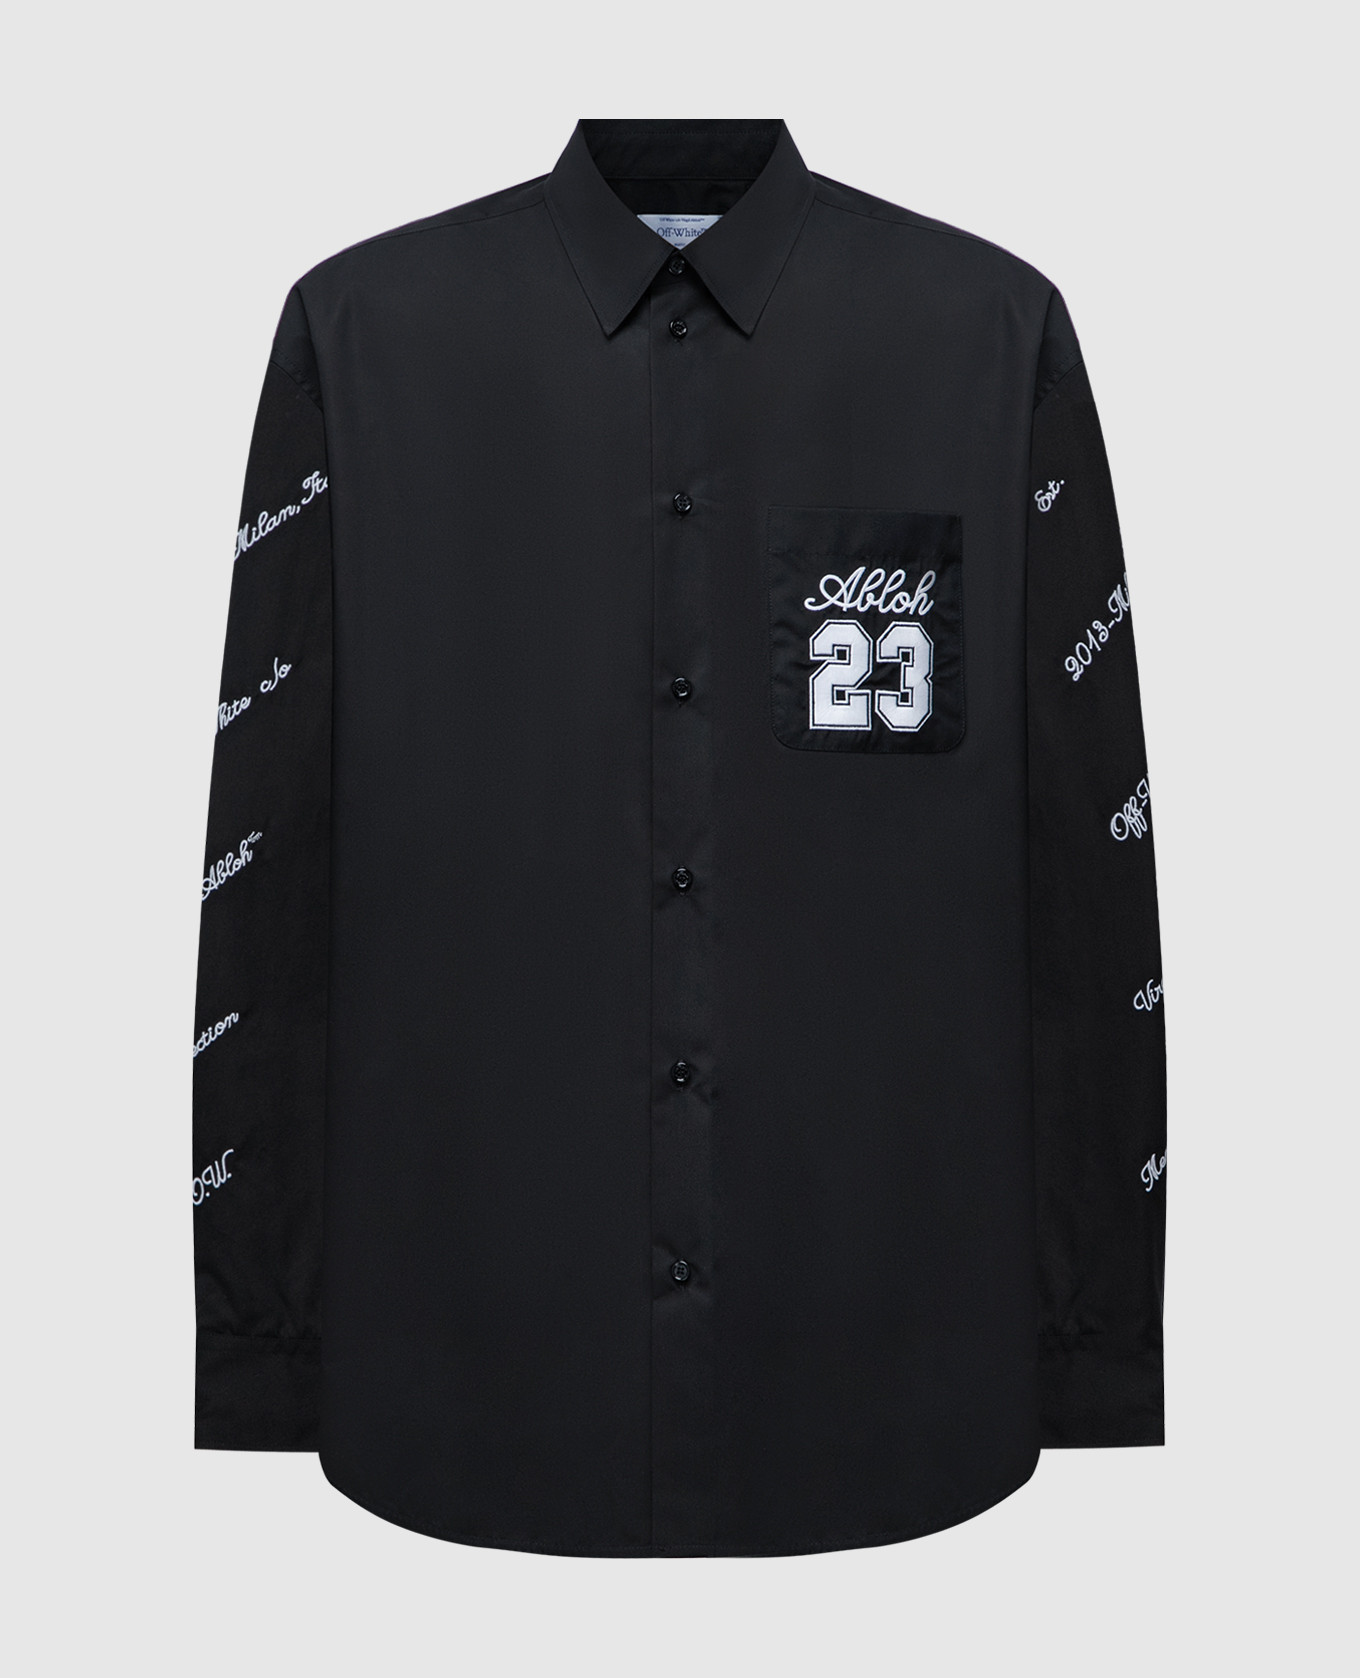 Black shirt with 23 Logo embroidery